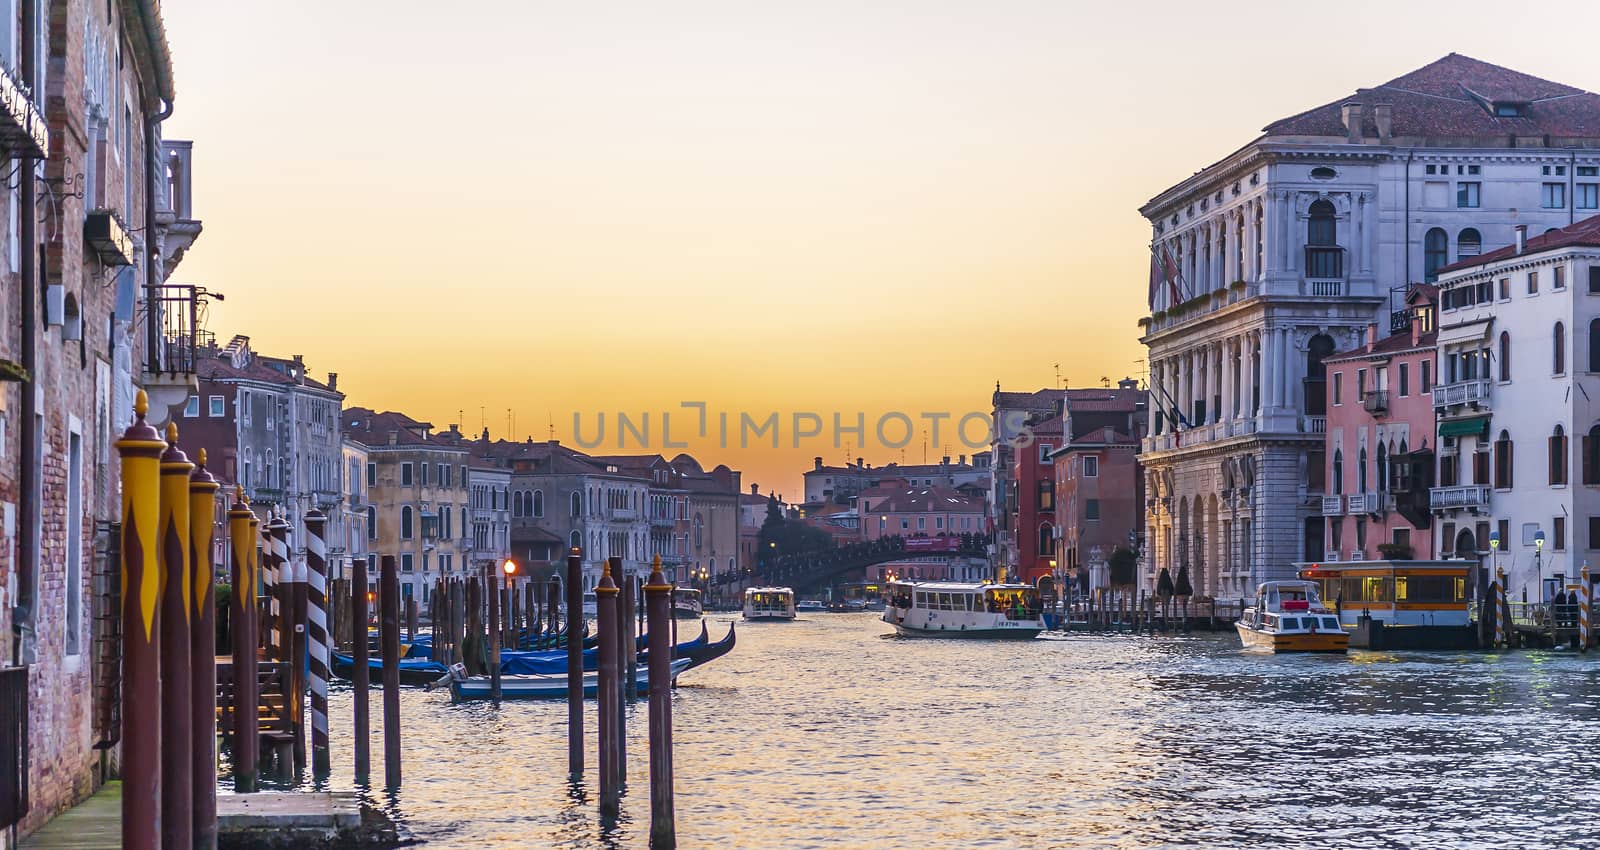 Panorama of the Grand Canal at dusk and its traffic, with its typical facades and gondolas in Venice in Veneto, Italy by Frederic